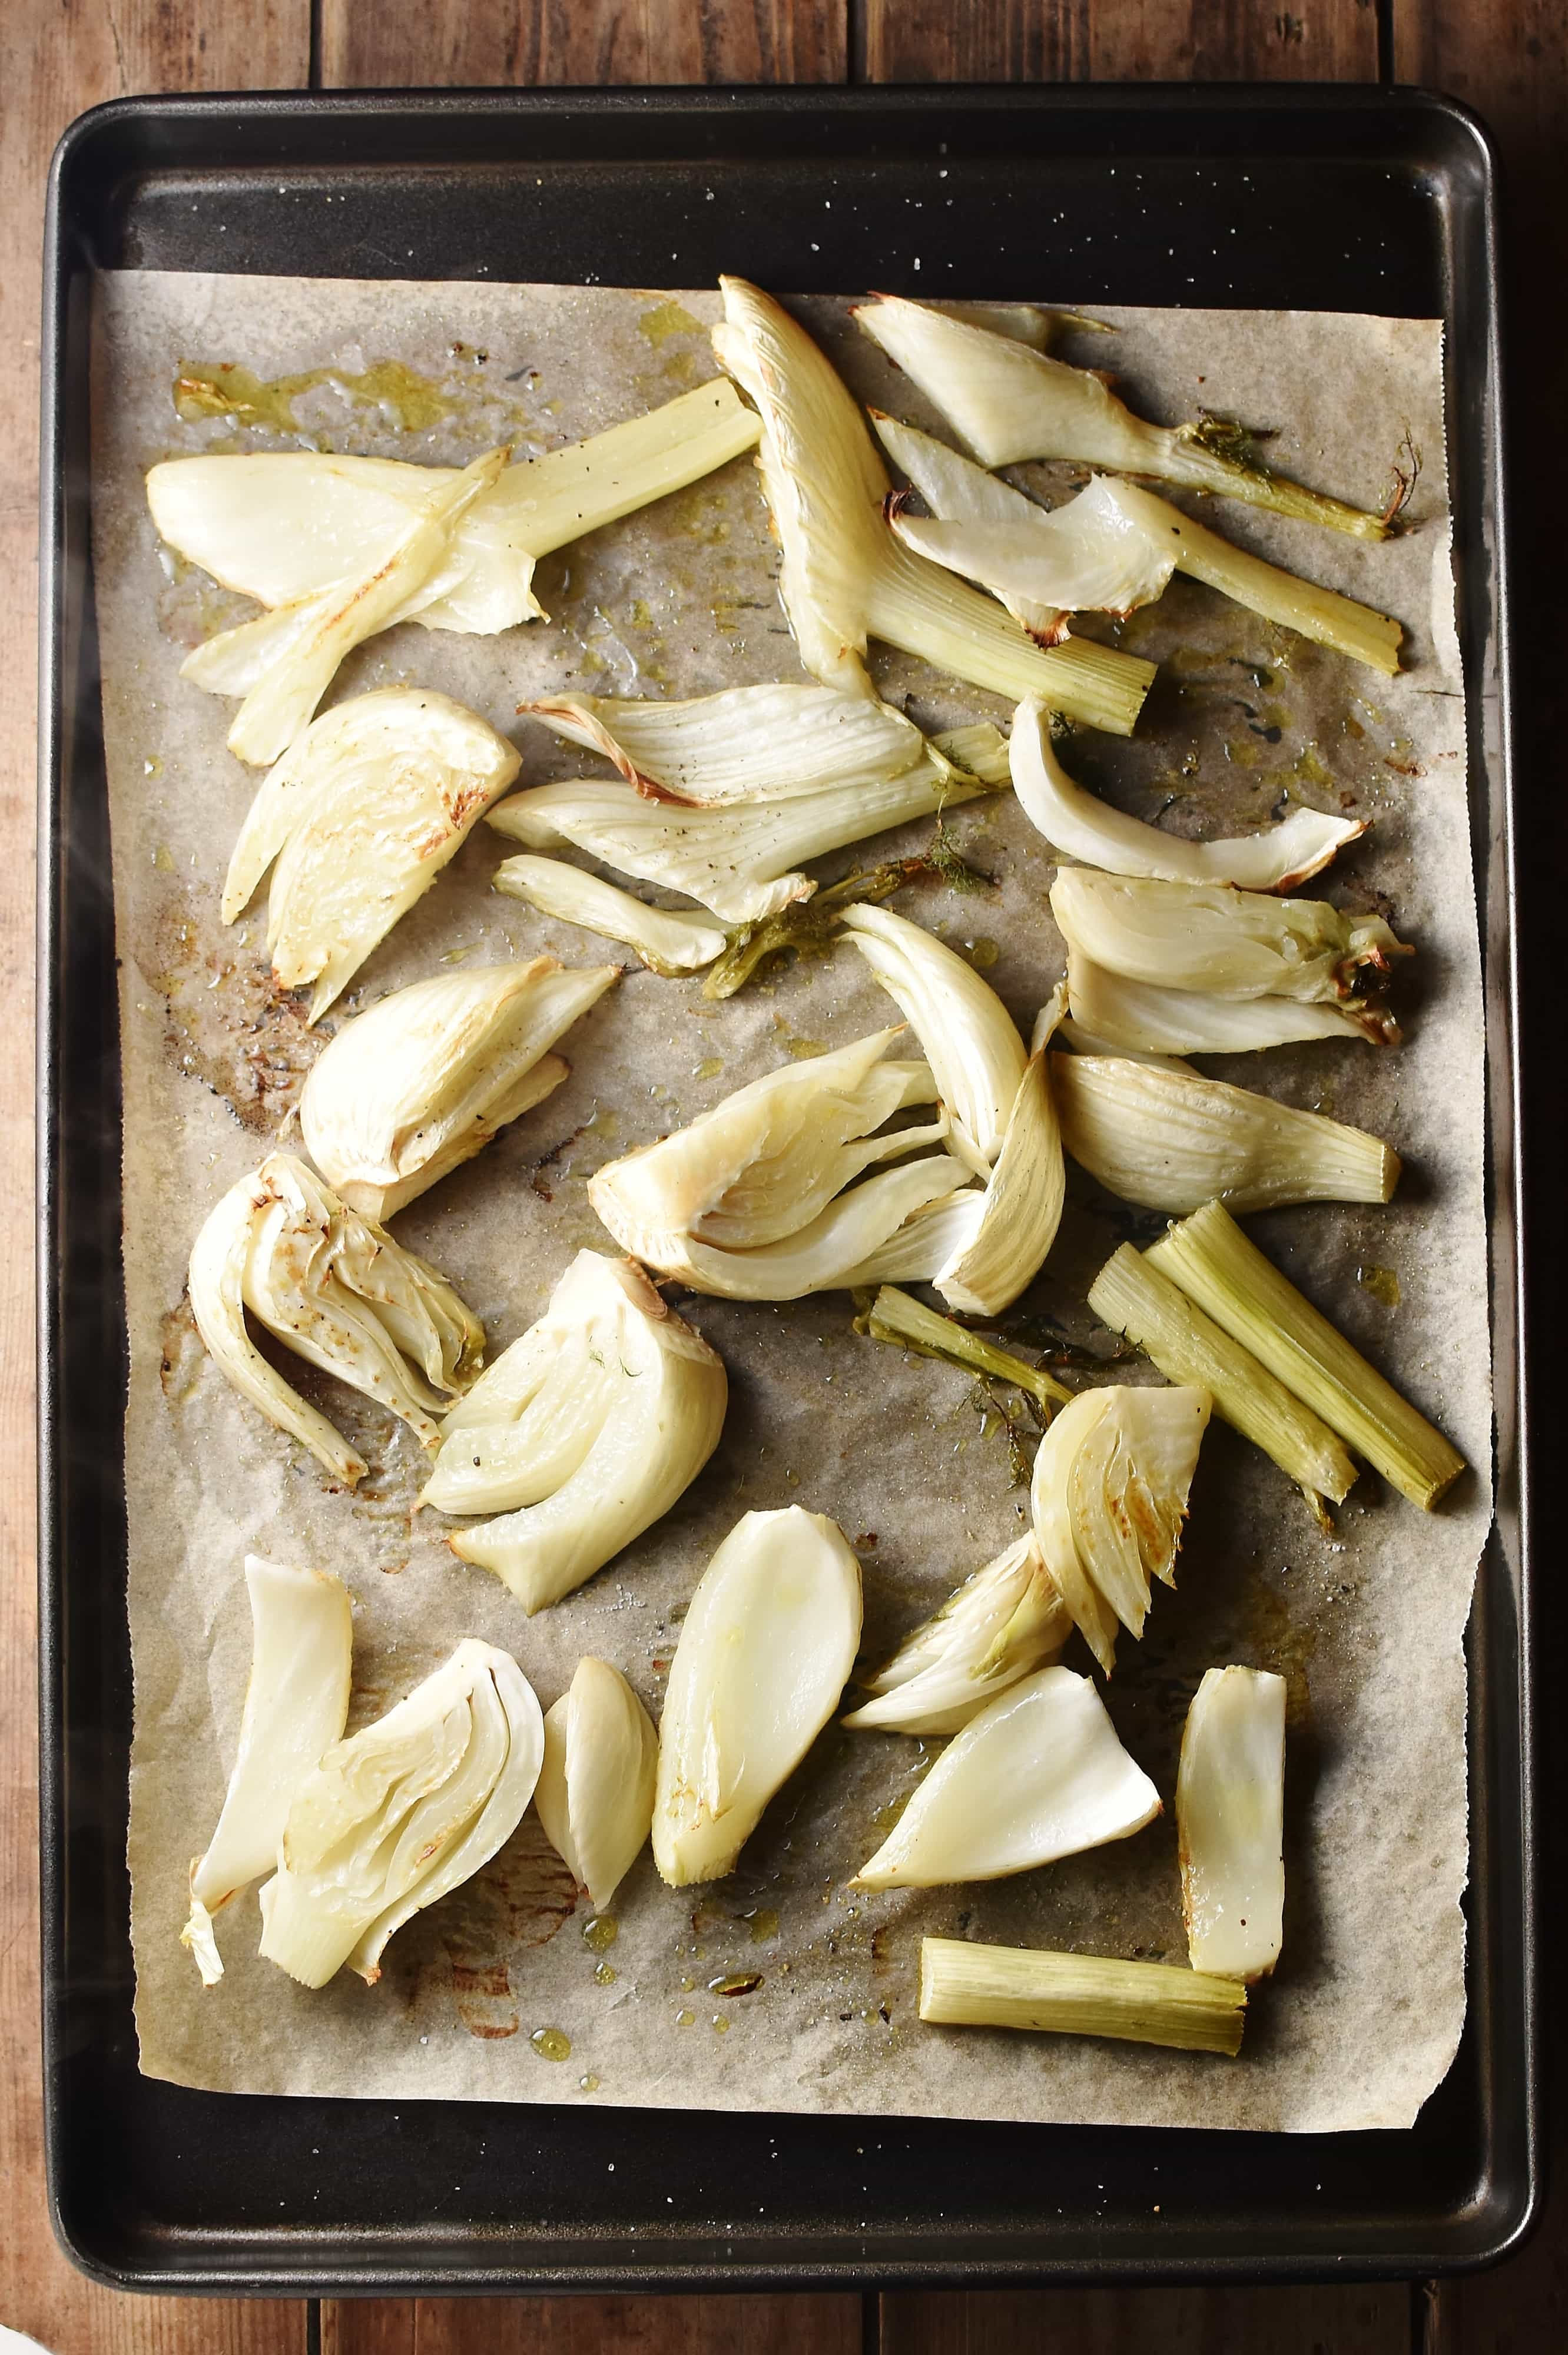 Roasted fennel pieces on top of baking sheet lined with parchment paper.